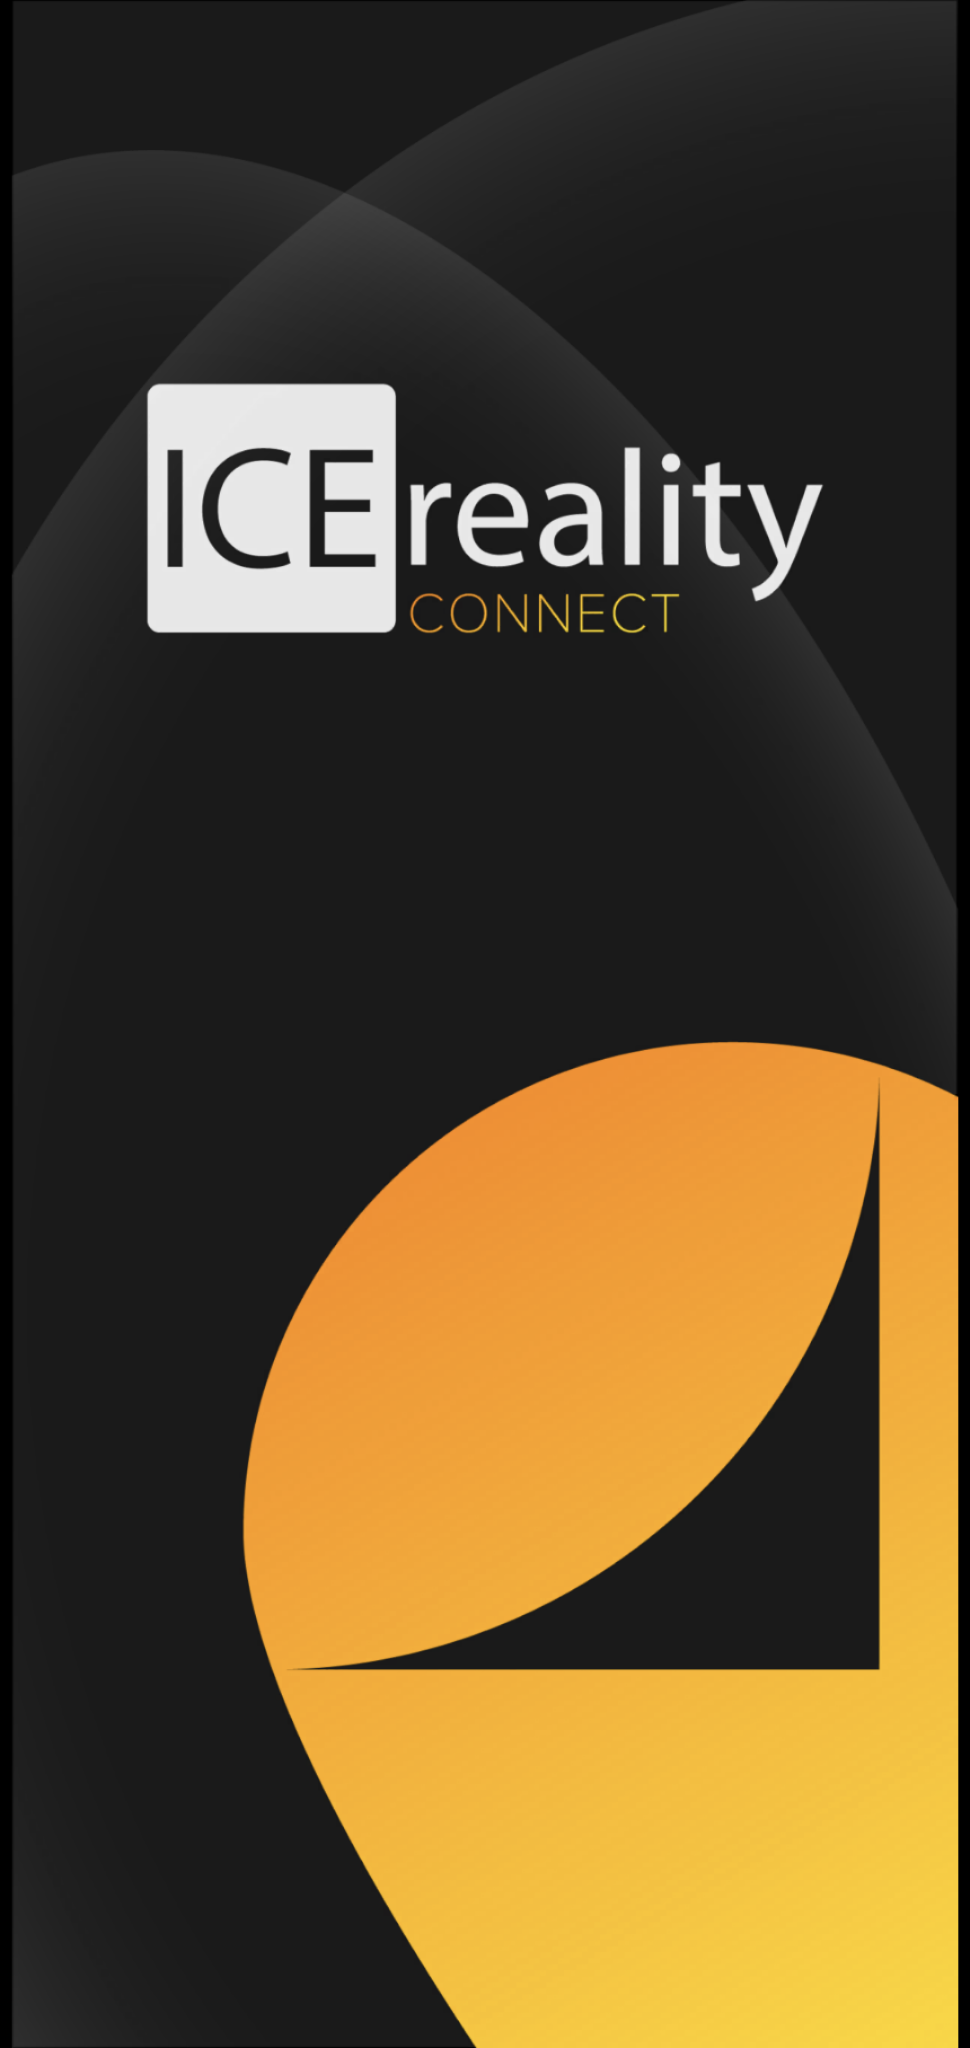 IMG-ICEreality-Connect_Mobile_010 The ICEreality Connect splash screen on an Android device